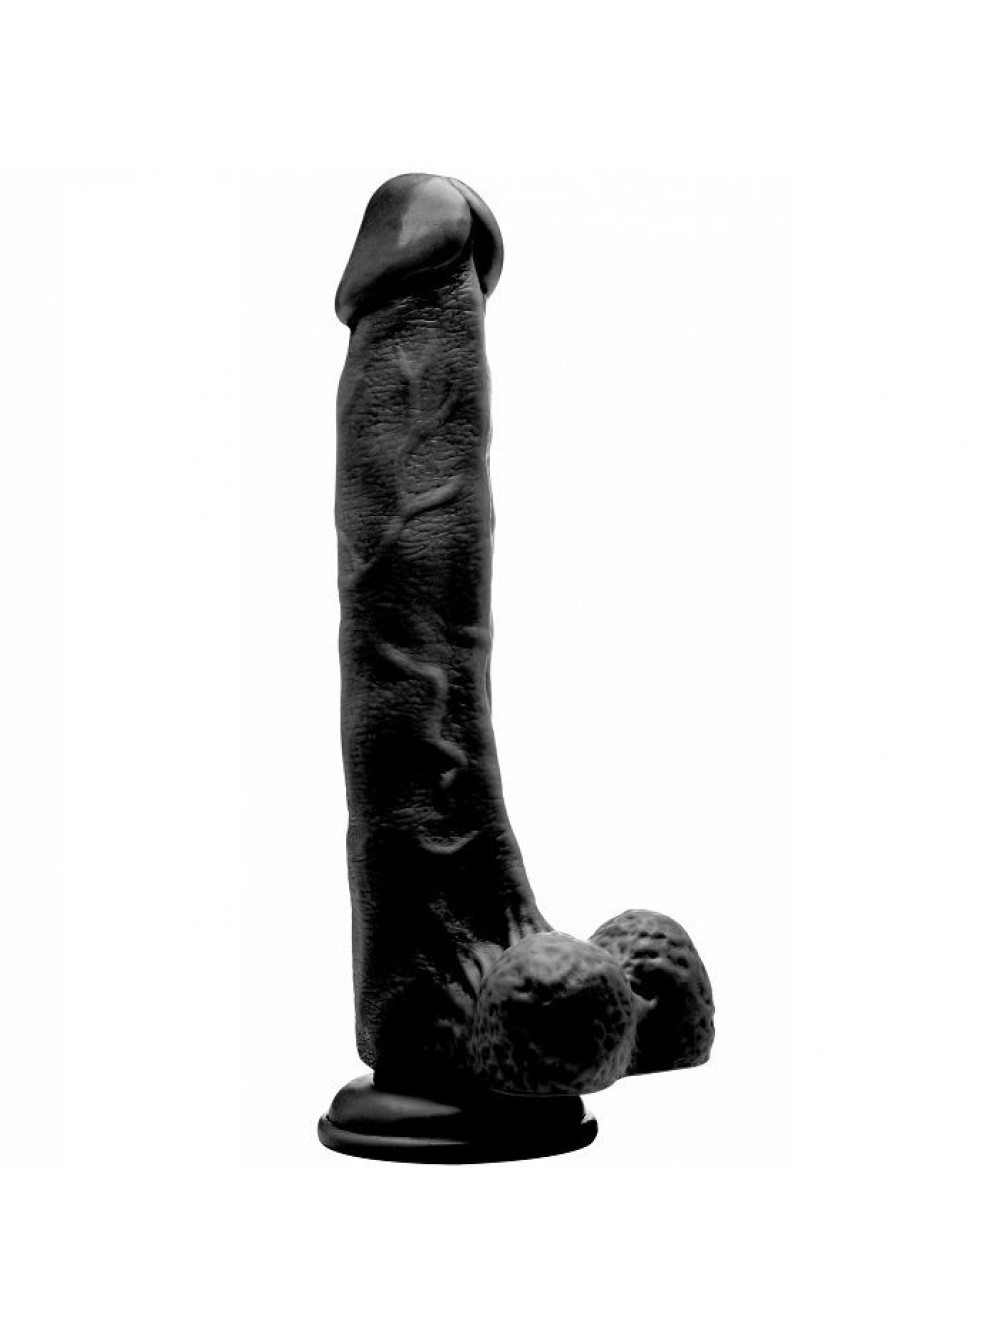 REAL ROCK 018 WITH SCROTUM 27 CM (20 CM INS) BLACK